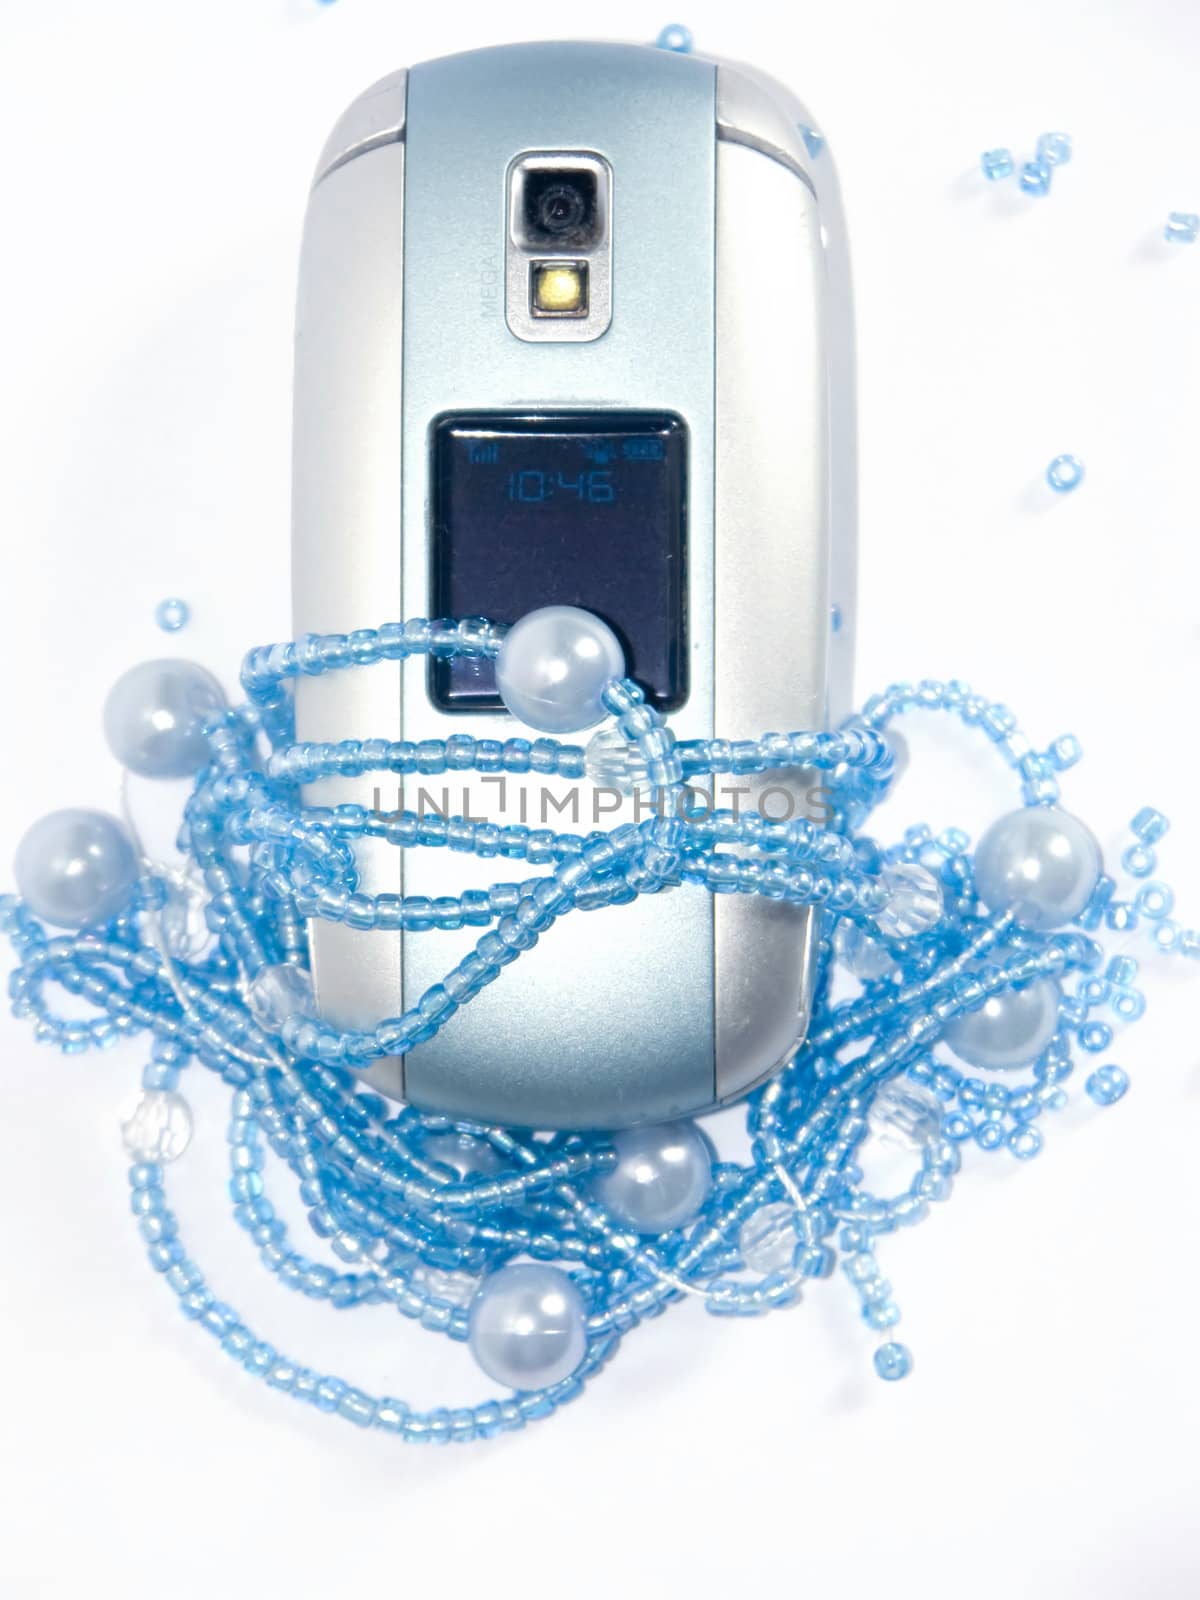 The torn thread of a beads and mobile phone by soloir